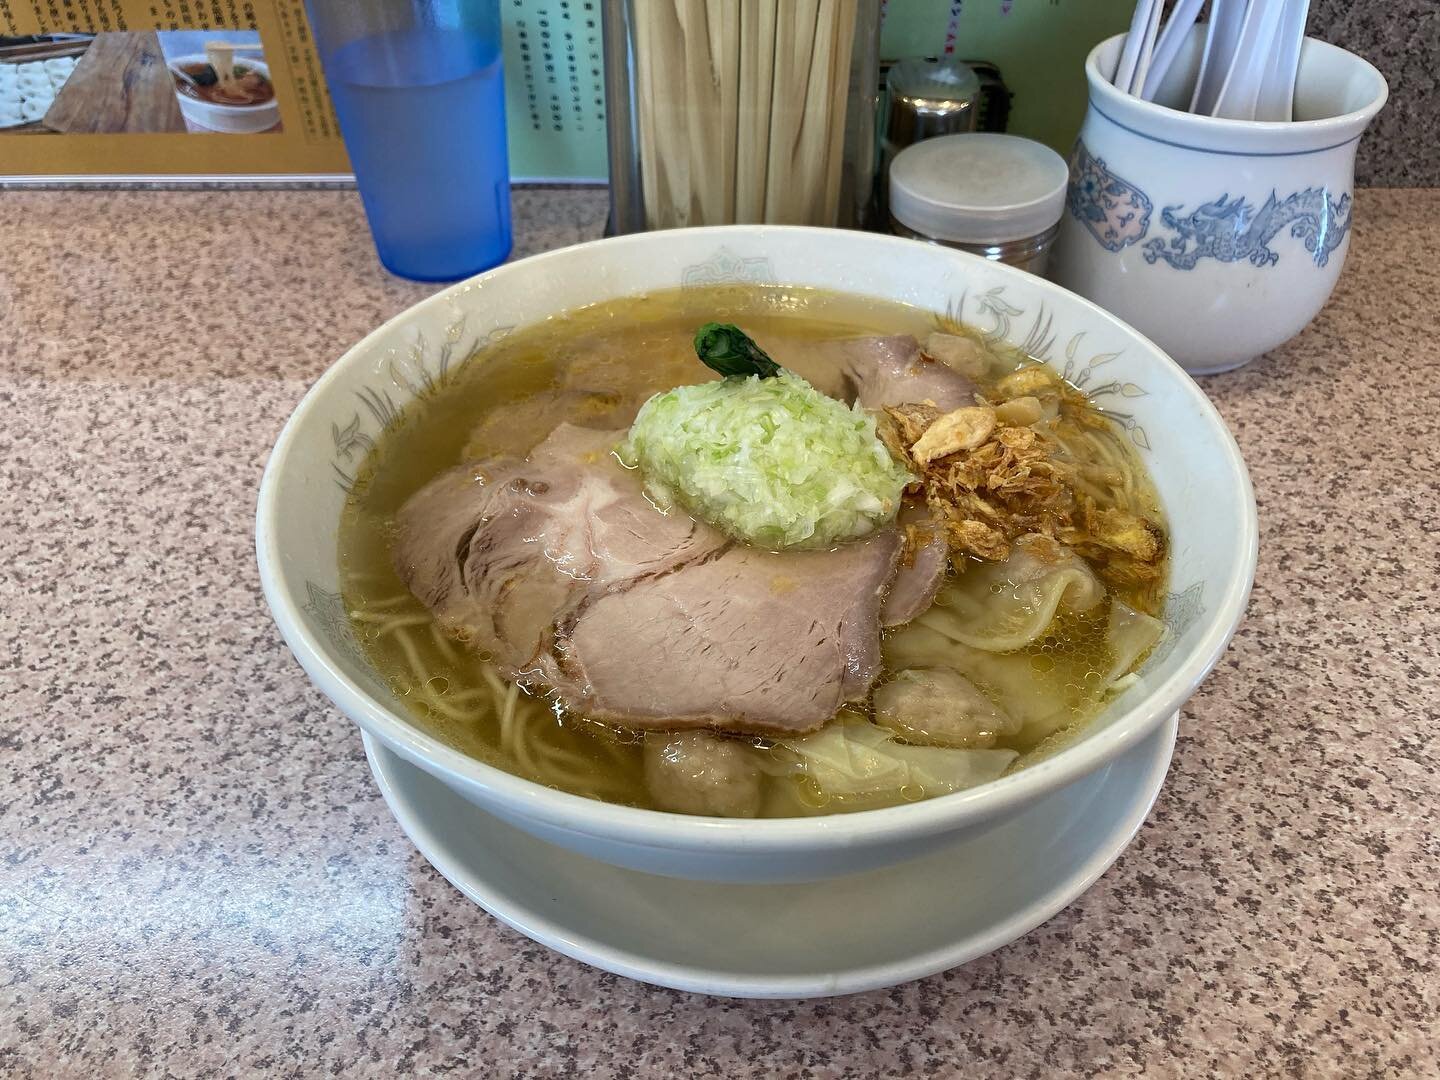 Shio Negi Chashu Wantan Ramen at Ramen Senmonten Koshigaya
Made it to Koshigaya recently with @ramenguidejapan to watch @isaac_butts4 score some free throws.
Apparently, this shop used to be in the top 50 of all of Japan in 2013! How times change, or